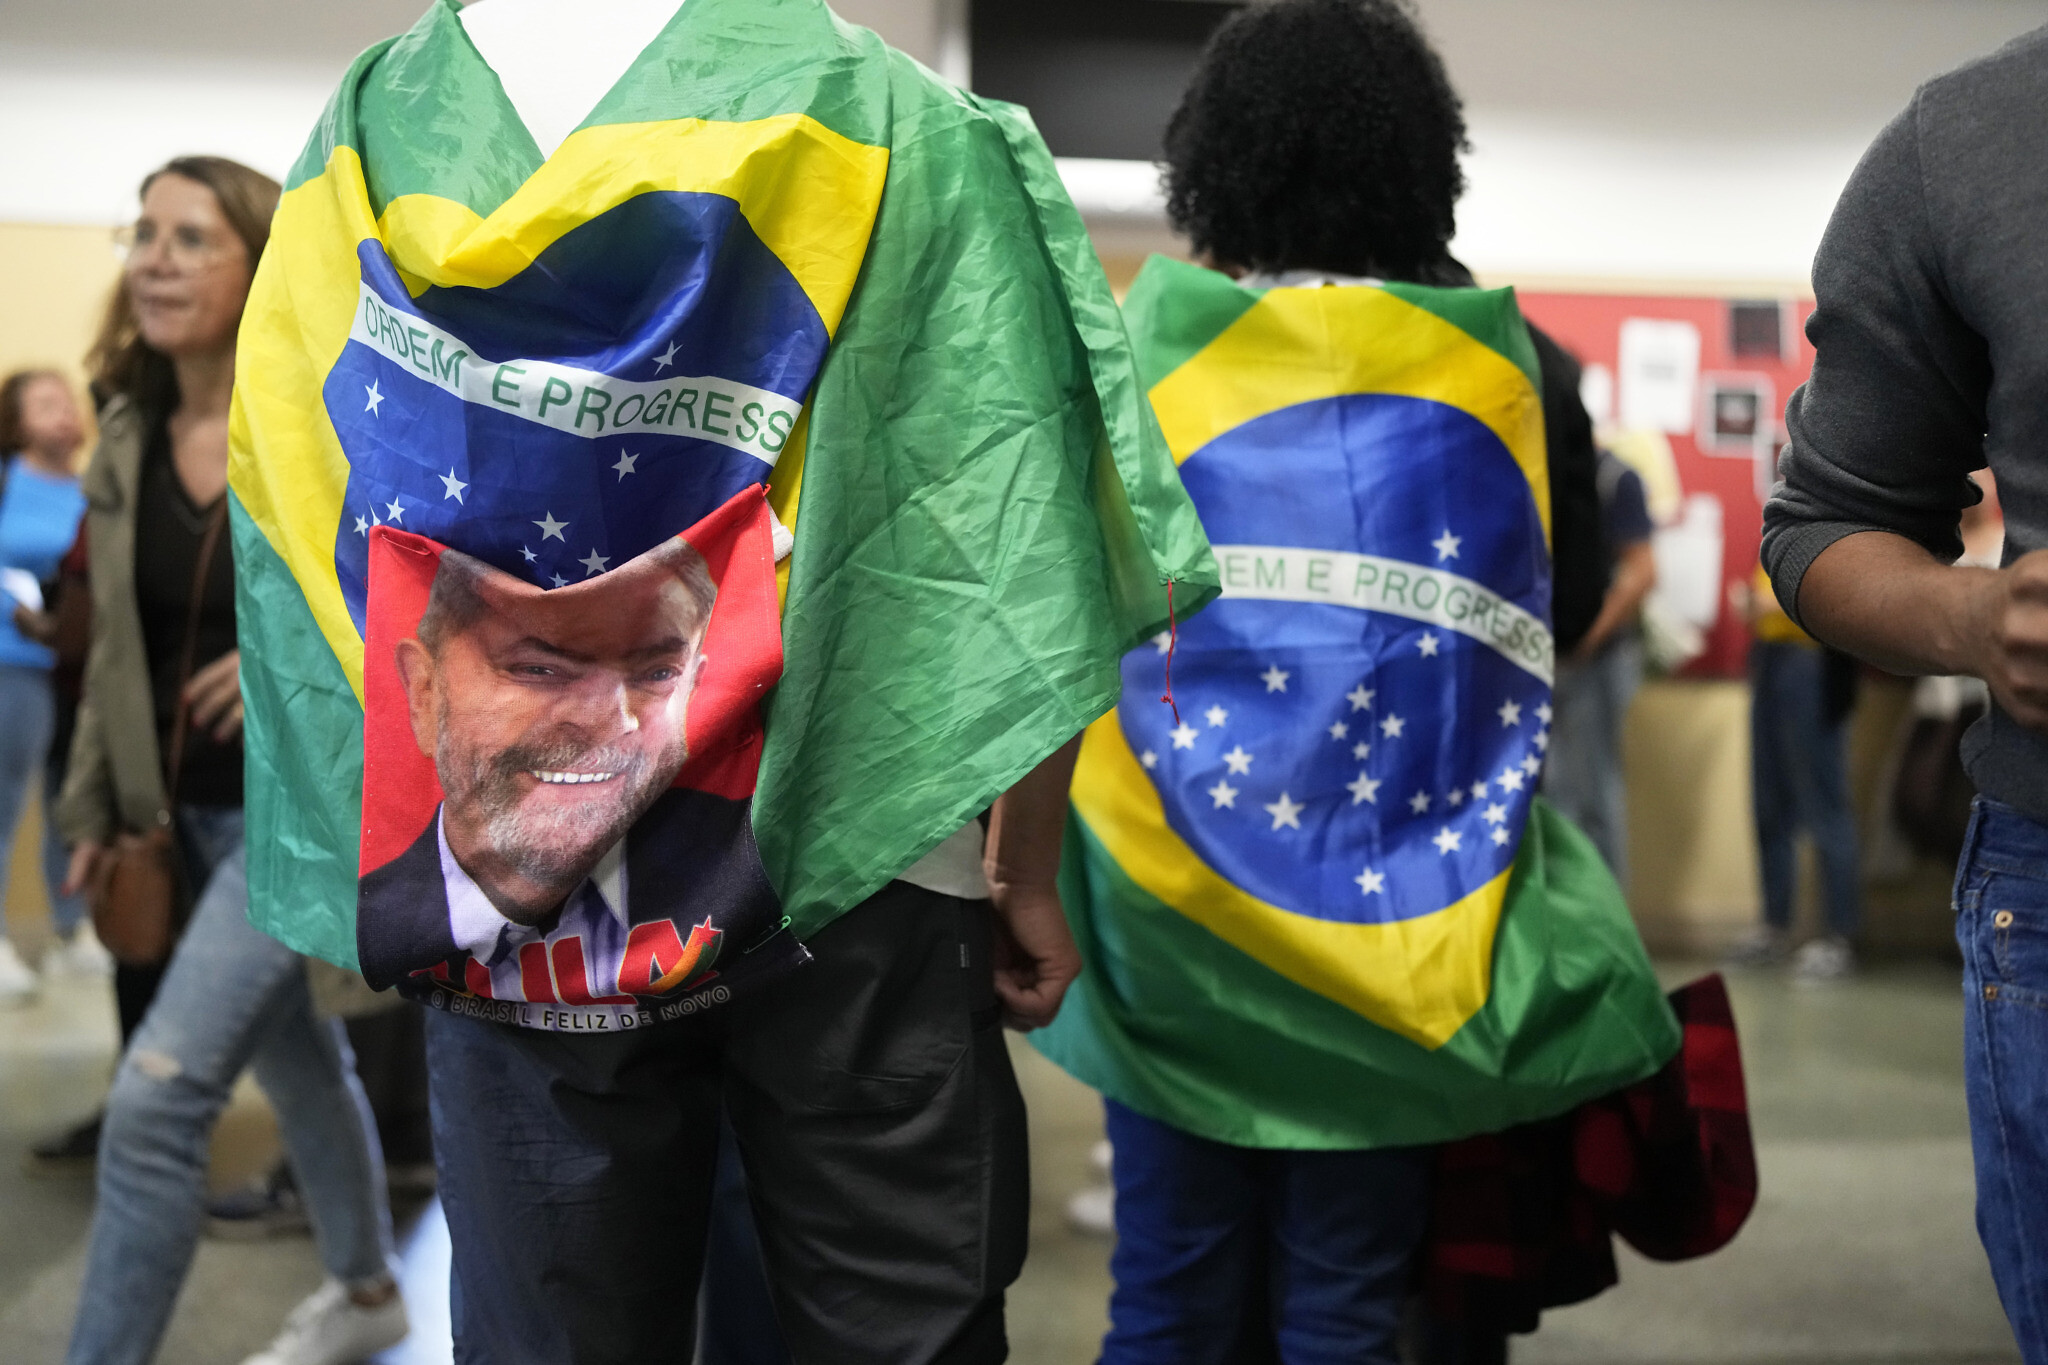 Bolsonaro pulls out all the stops to rally base on Brazil's